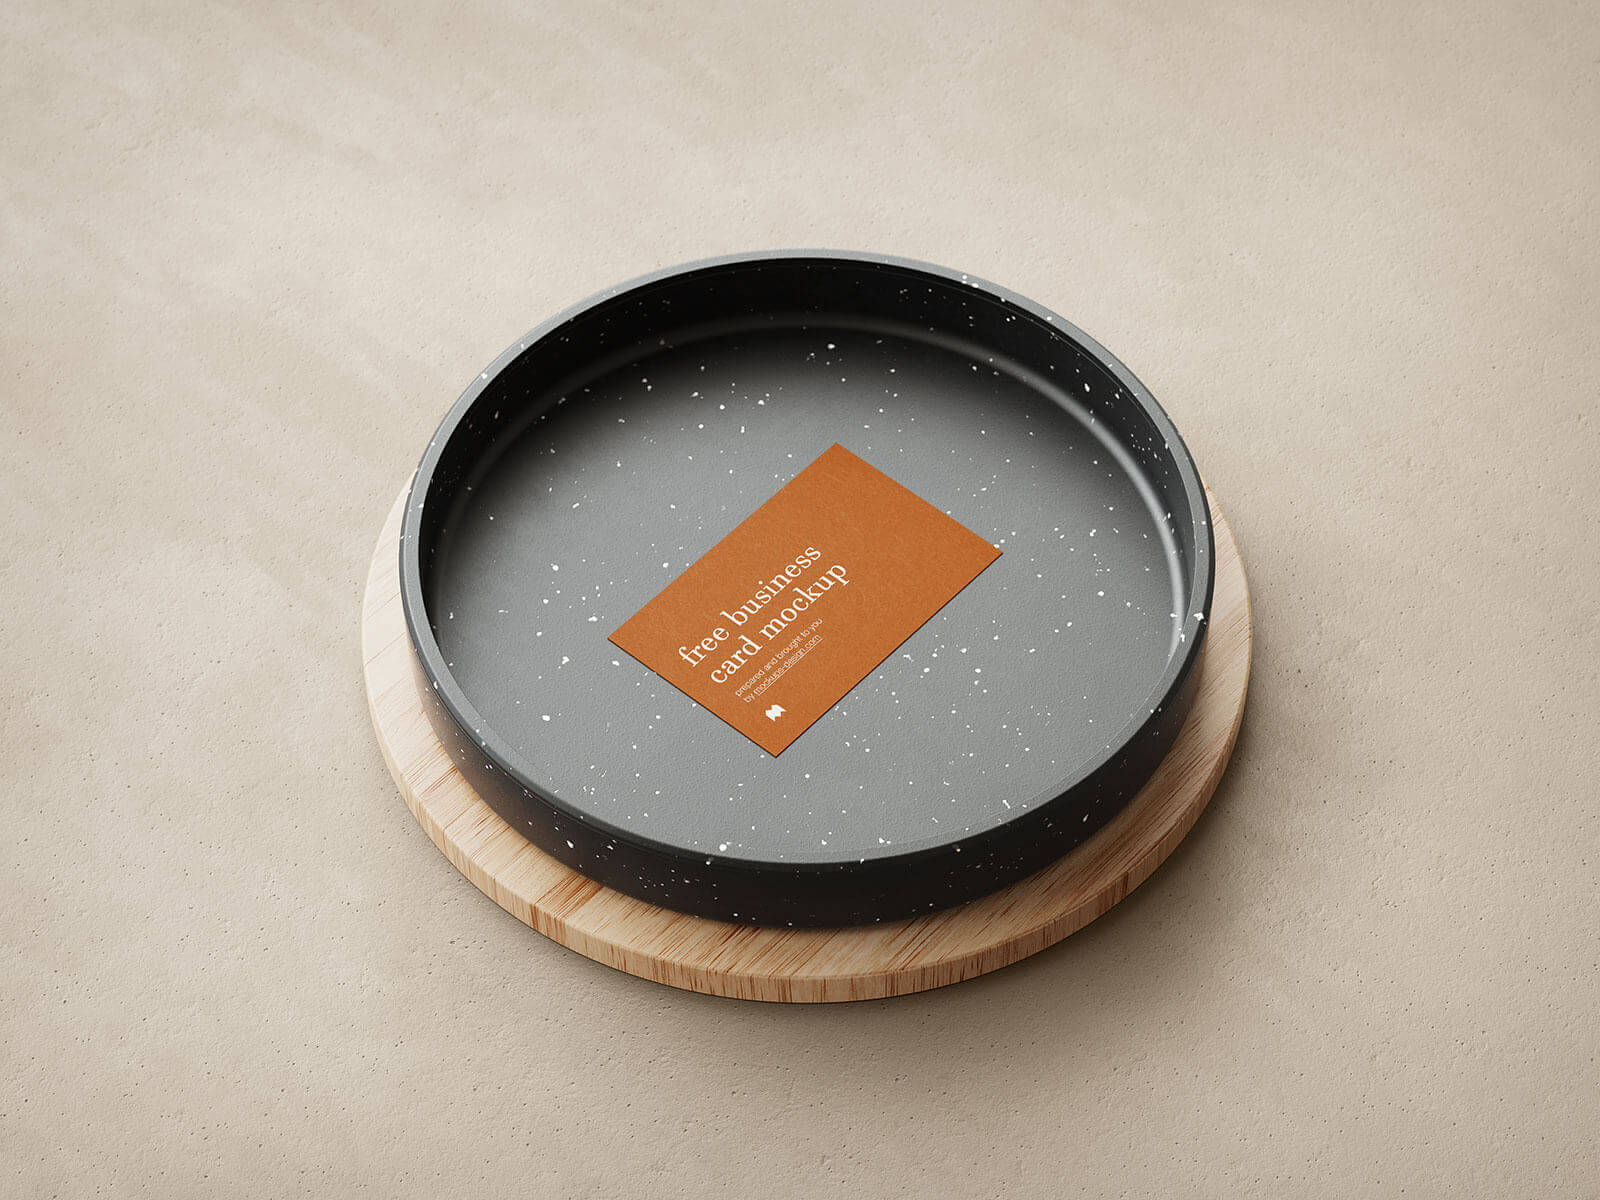 Free Business Card In A Cooking Pot Mockup PSD Set (1)